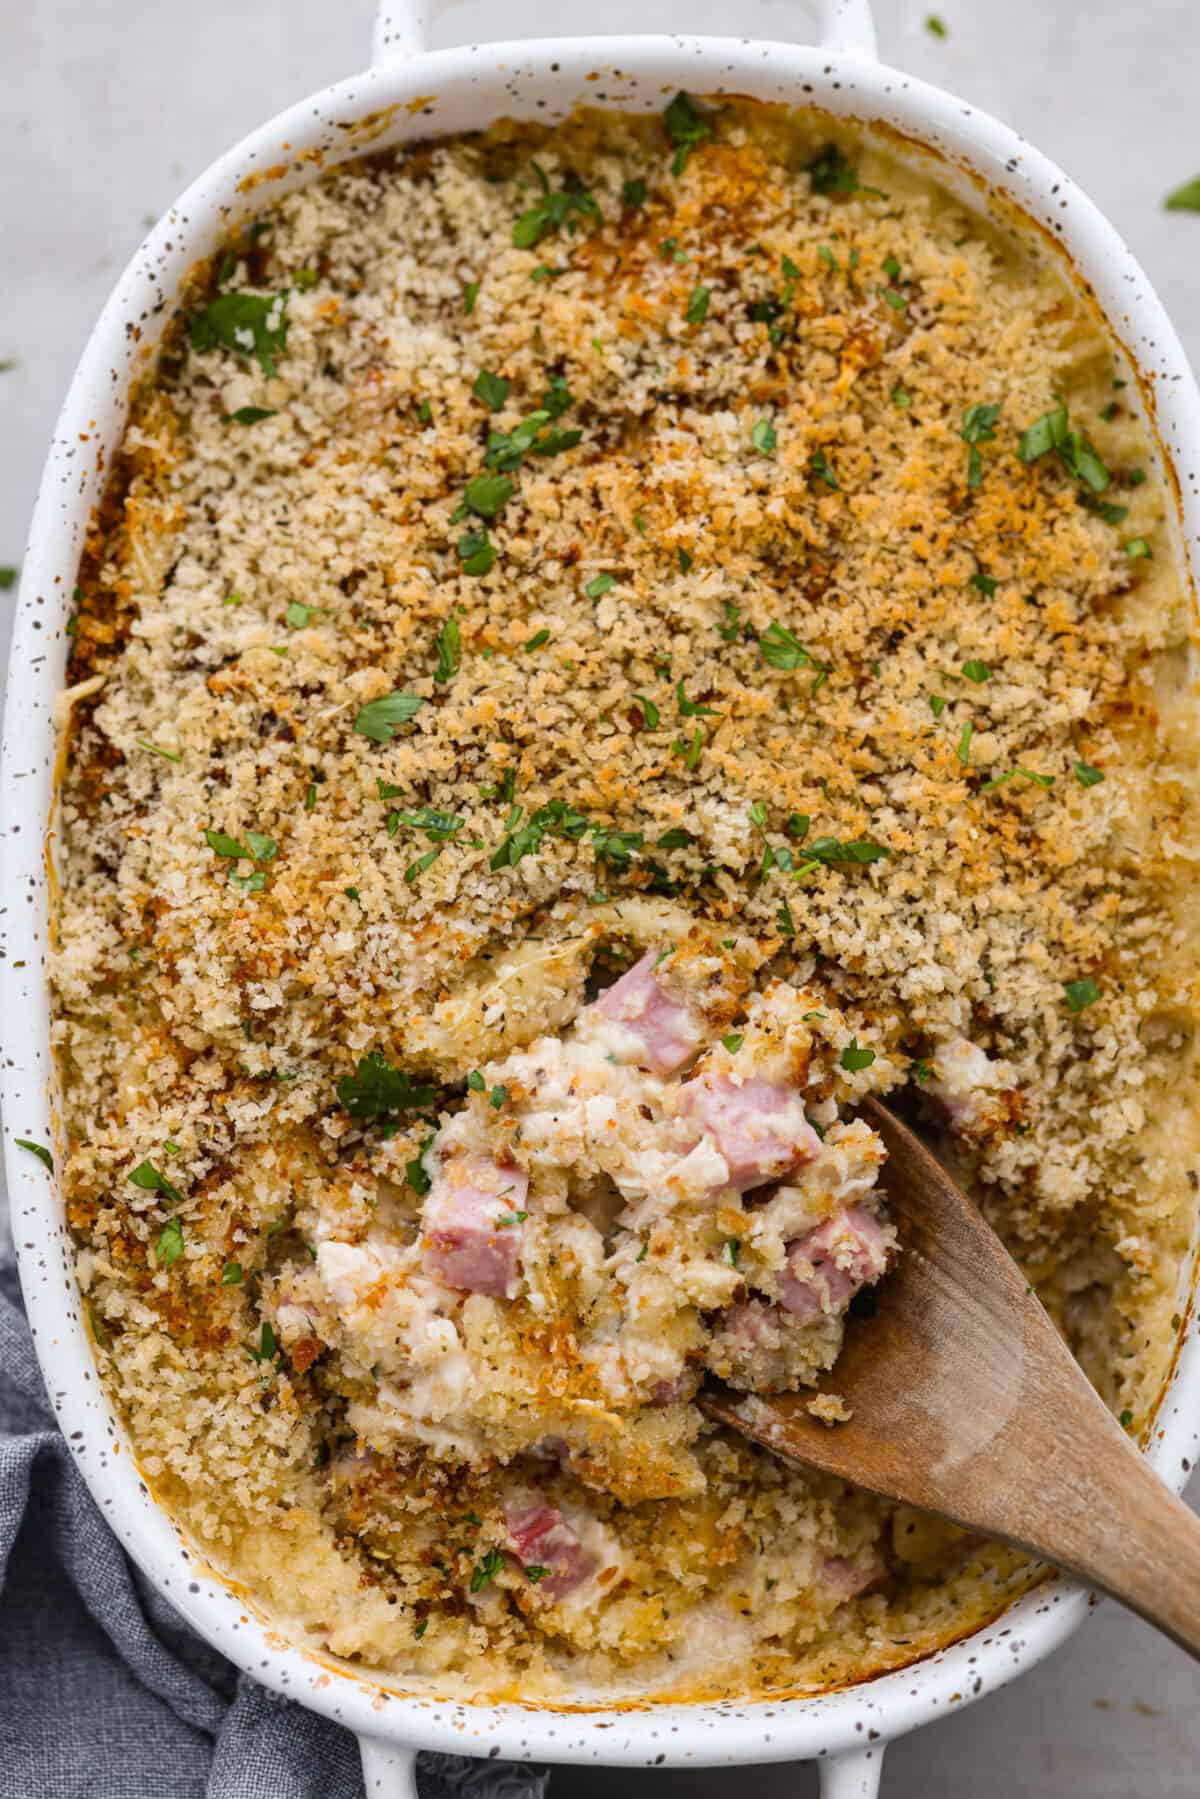 Top-down view of chicken cordon bleu casserole with a scoop being taken out of it.